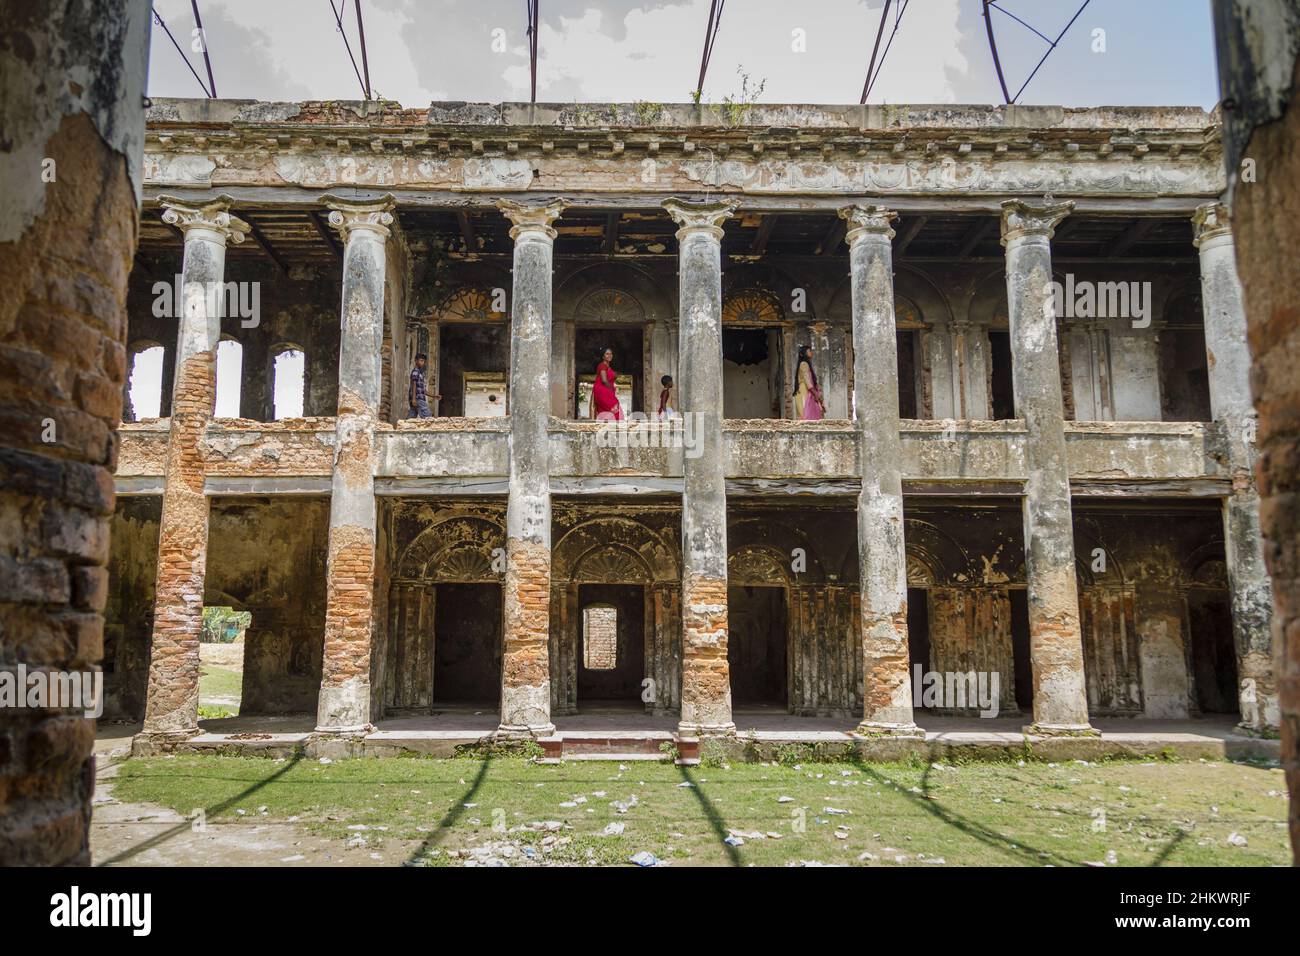 A young family walking in the ruins of the Teota Zamindar Palace in the Manikganj district. The palace, believed to be around 300 years old, had more than 50 rooms originally. Stock Photo